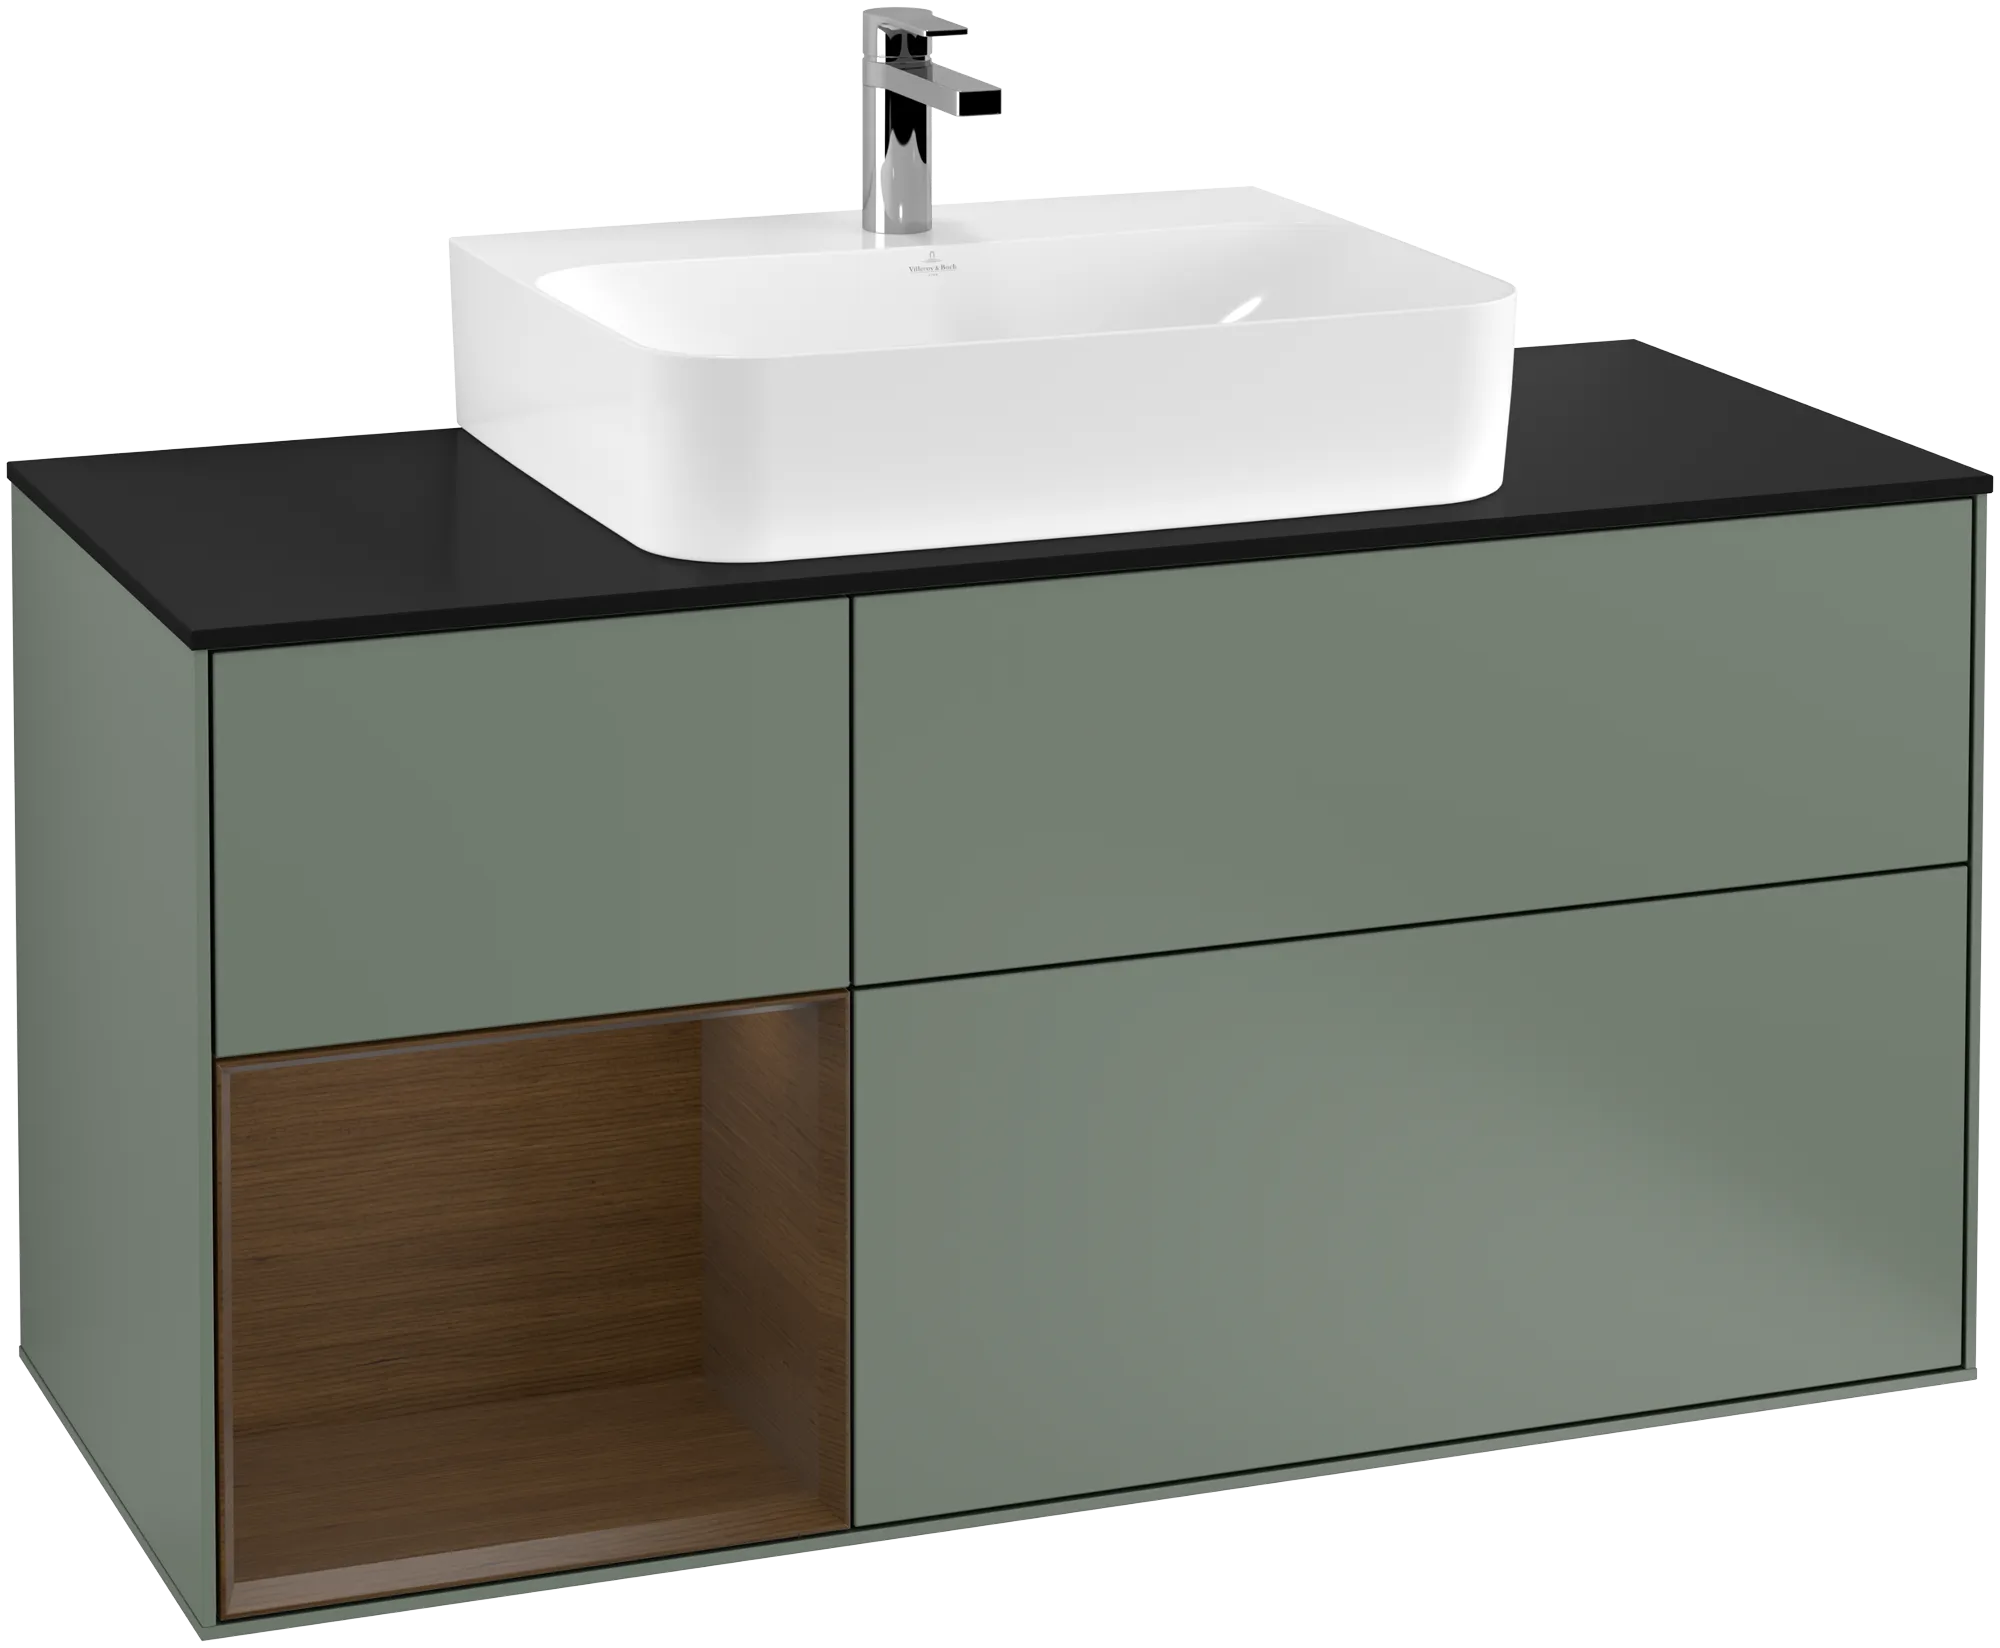 Picture of VILLEROY BOCH Finion Vanity unit, with lighting, 3 pull-out compartments, 1200 x 603 x 501 mm, Olive Matt Lacquer / Walnut Veneer / Glass Black Matt #G162GNGM